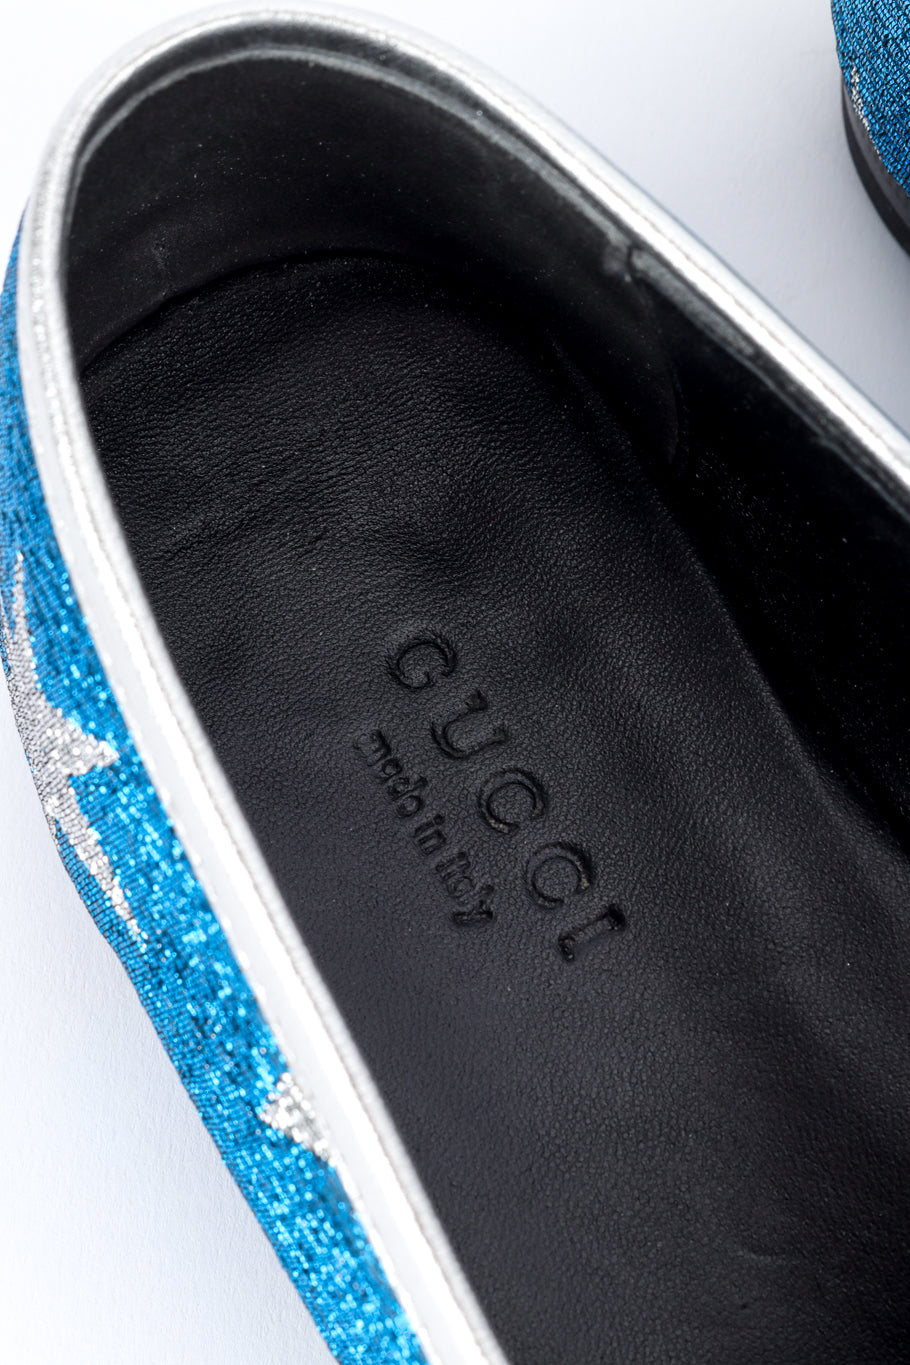 Gucci Starry Sky Lurex Loafers signed insole @recess la